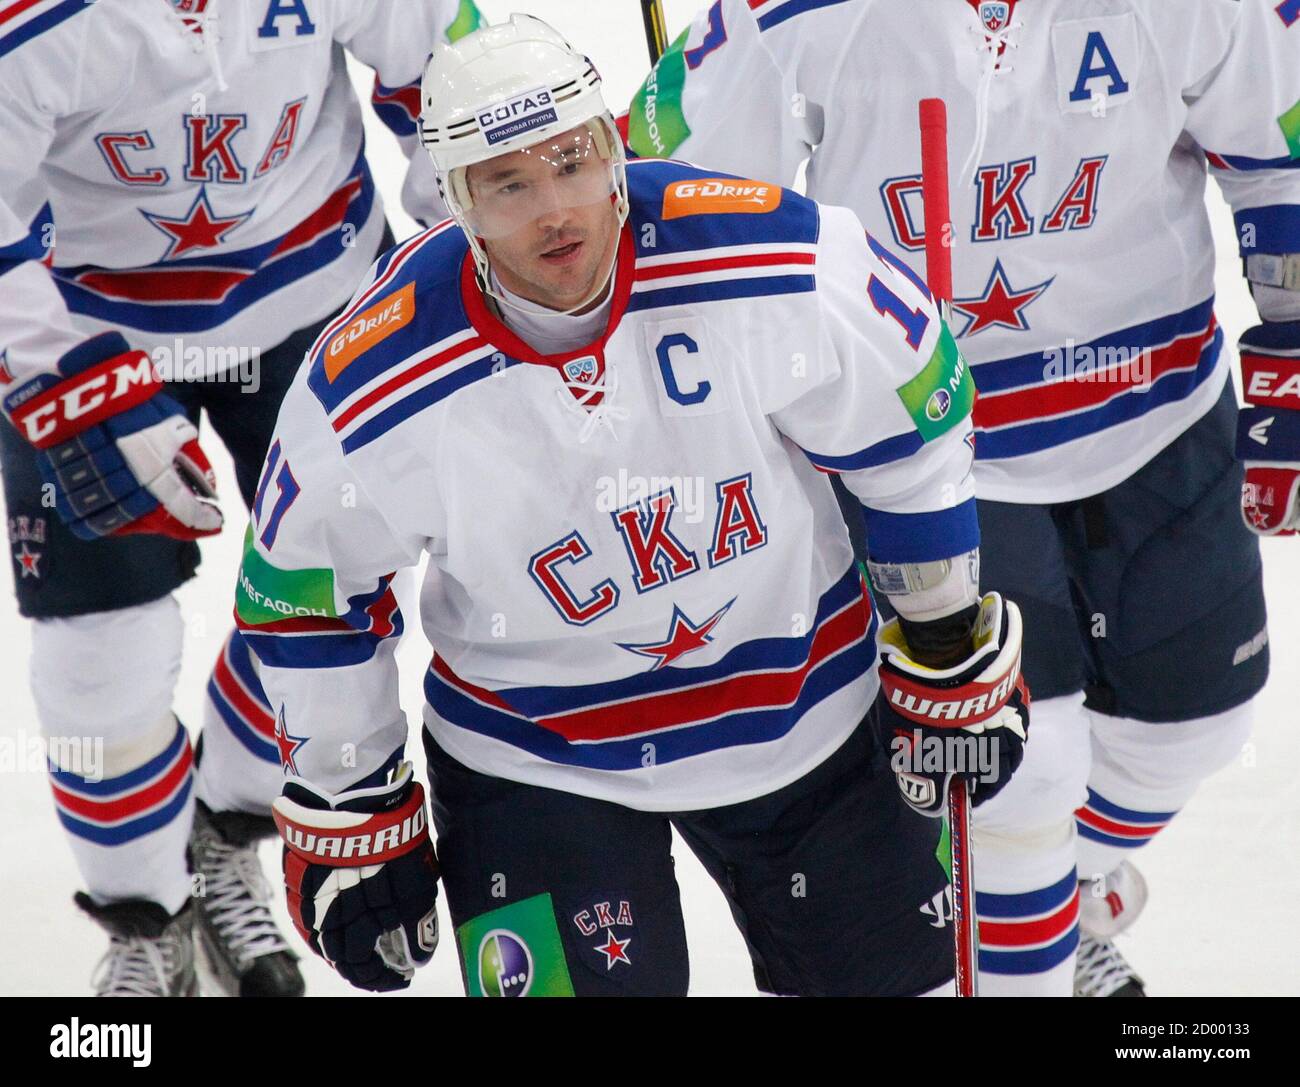 SKA St. Petersburg's Ilya Kovalchuk skates with team mates during their  Kontinental Hockey League (KHL) game against Dynamo in Moscow September 23,  2012. Alexander Ovechkin has become the latest high-profile player to